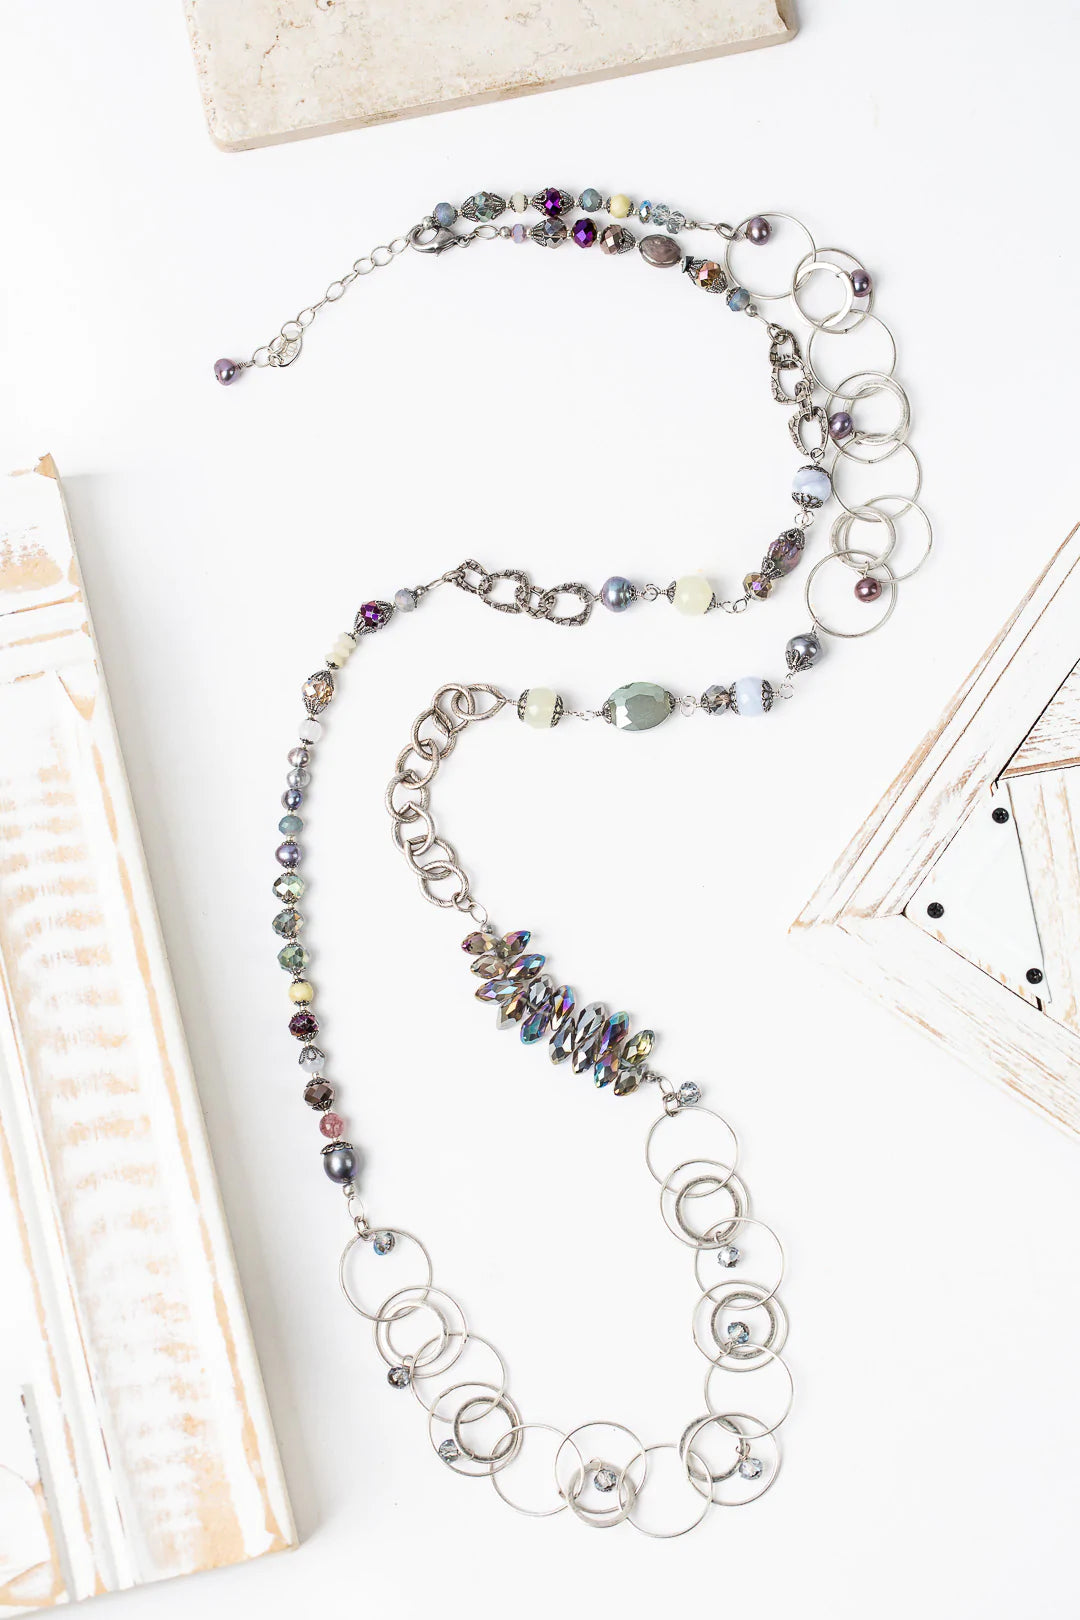 Reflections Layering Necklace